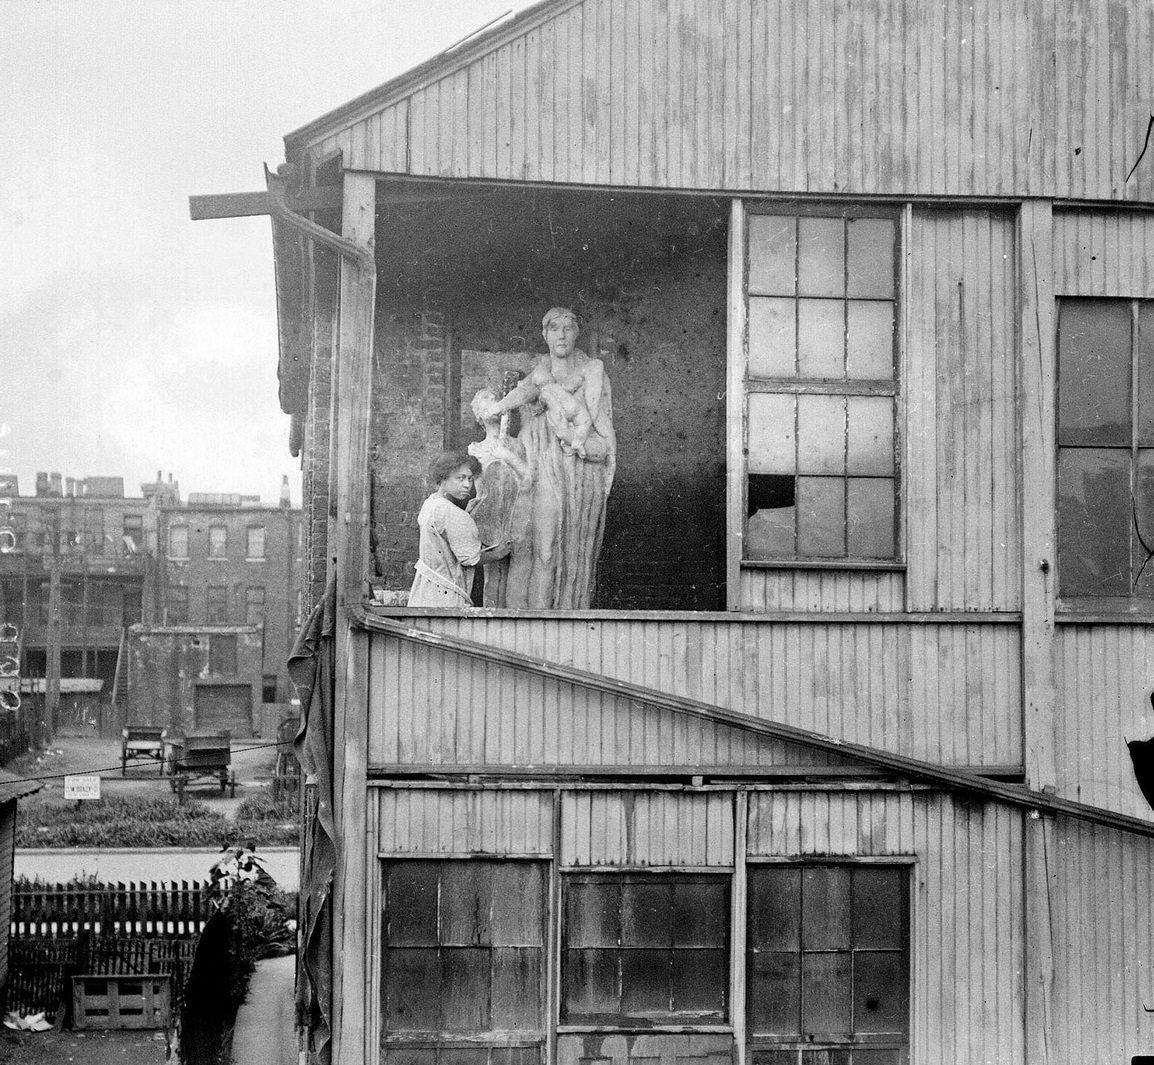 Ida McClelland Stout, an African American sculptor, standing on a tenement porch, next to a monumental Ethiopian sculpture, Chicago, Illinois, 1910s.